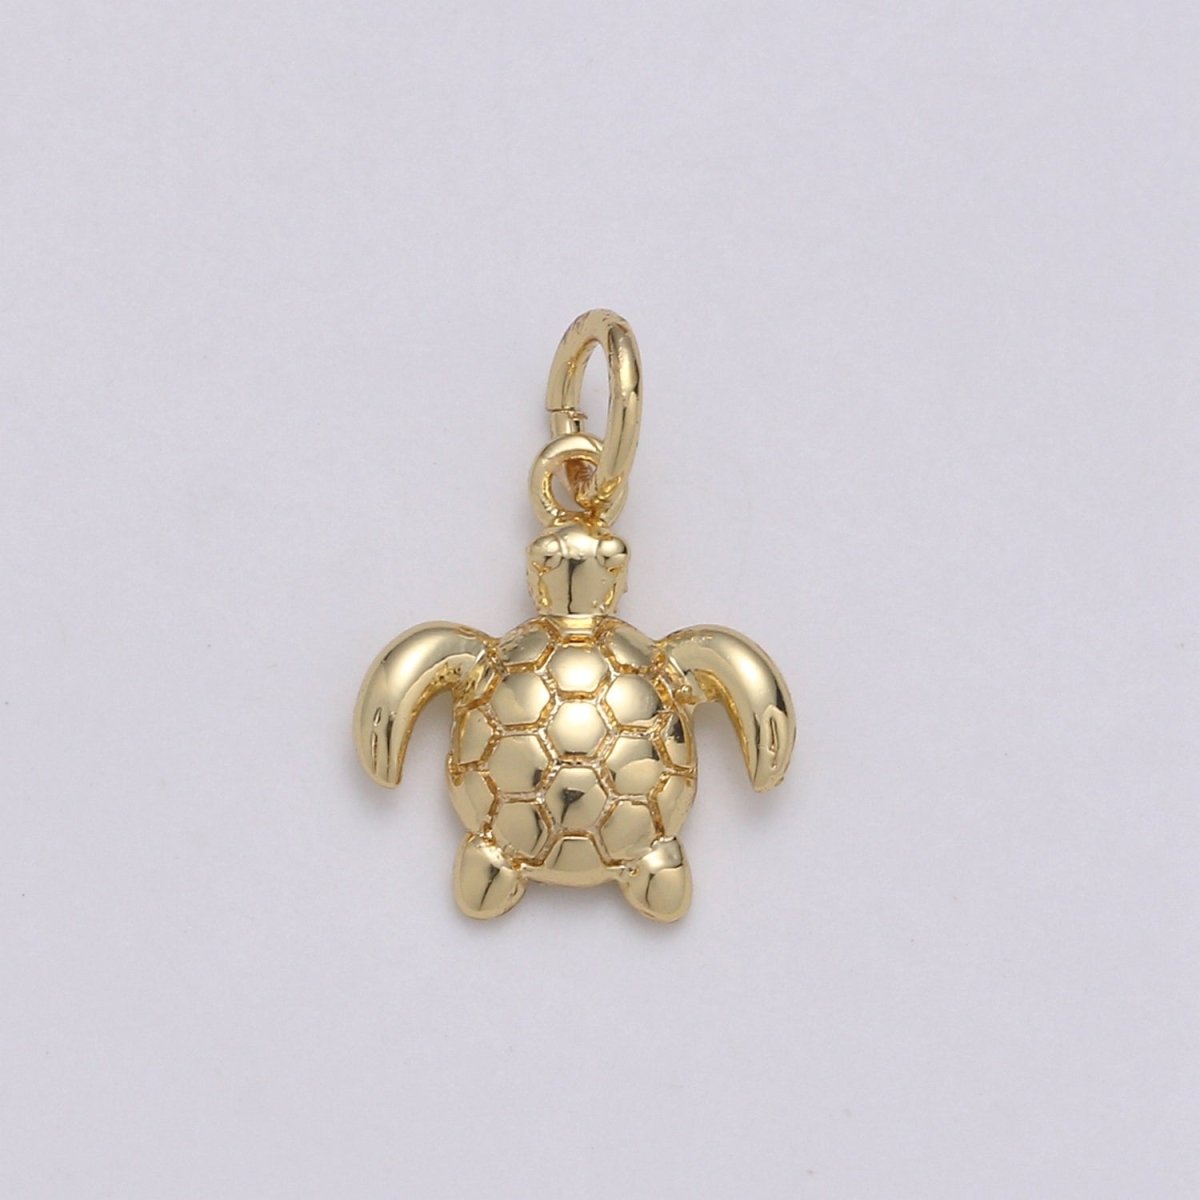 14K Gold Filled Turtle Charm- Small Turtle Charm, Hawaiian Honu Turtle, Sea Turtle charm for bracelet earring necklace Under the sea inspired C-513 - DLUXCA